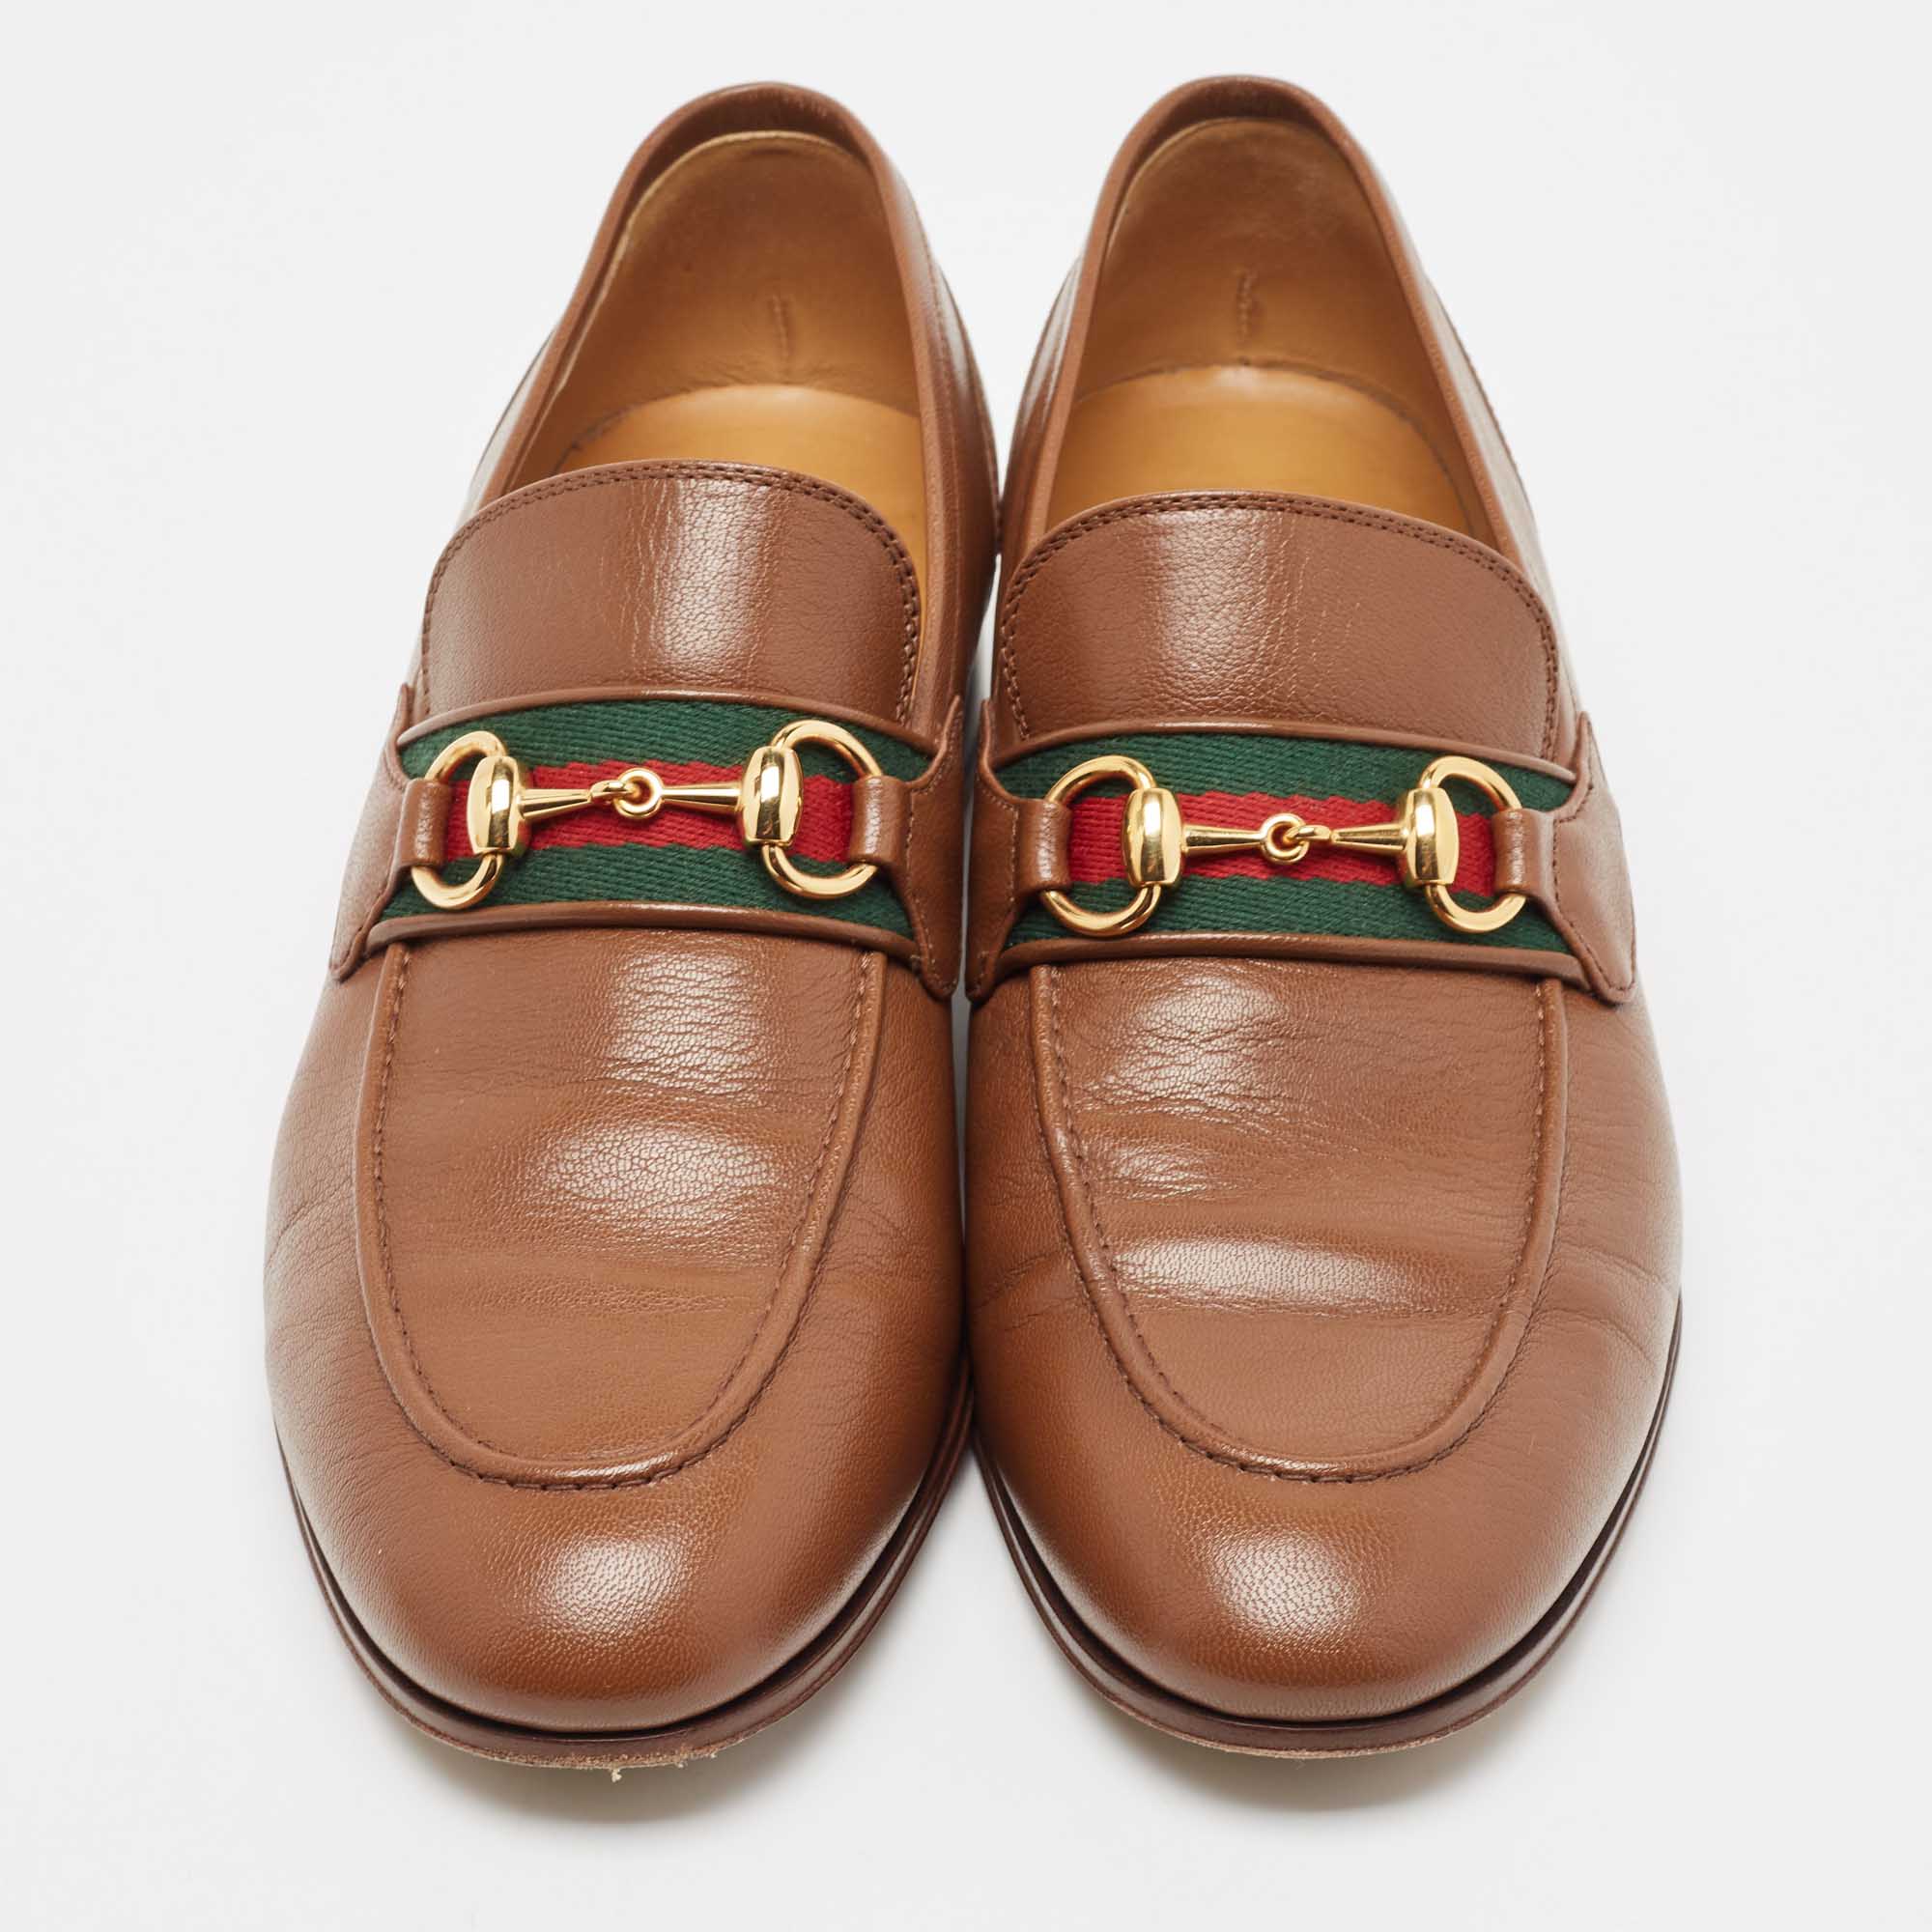 Gucci Brown Leather Brixton Loafers Size 41.5